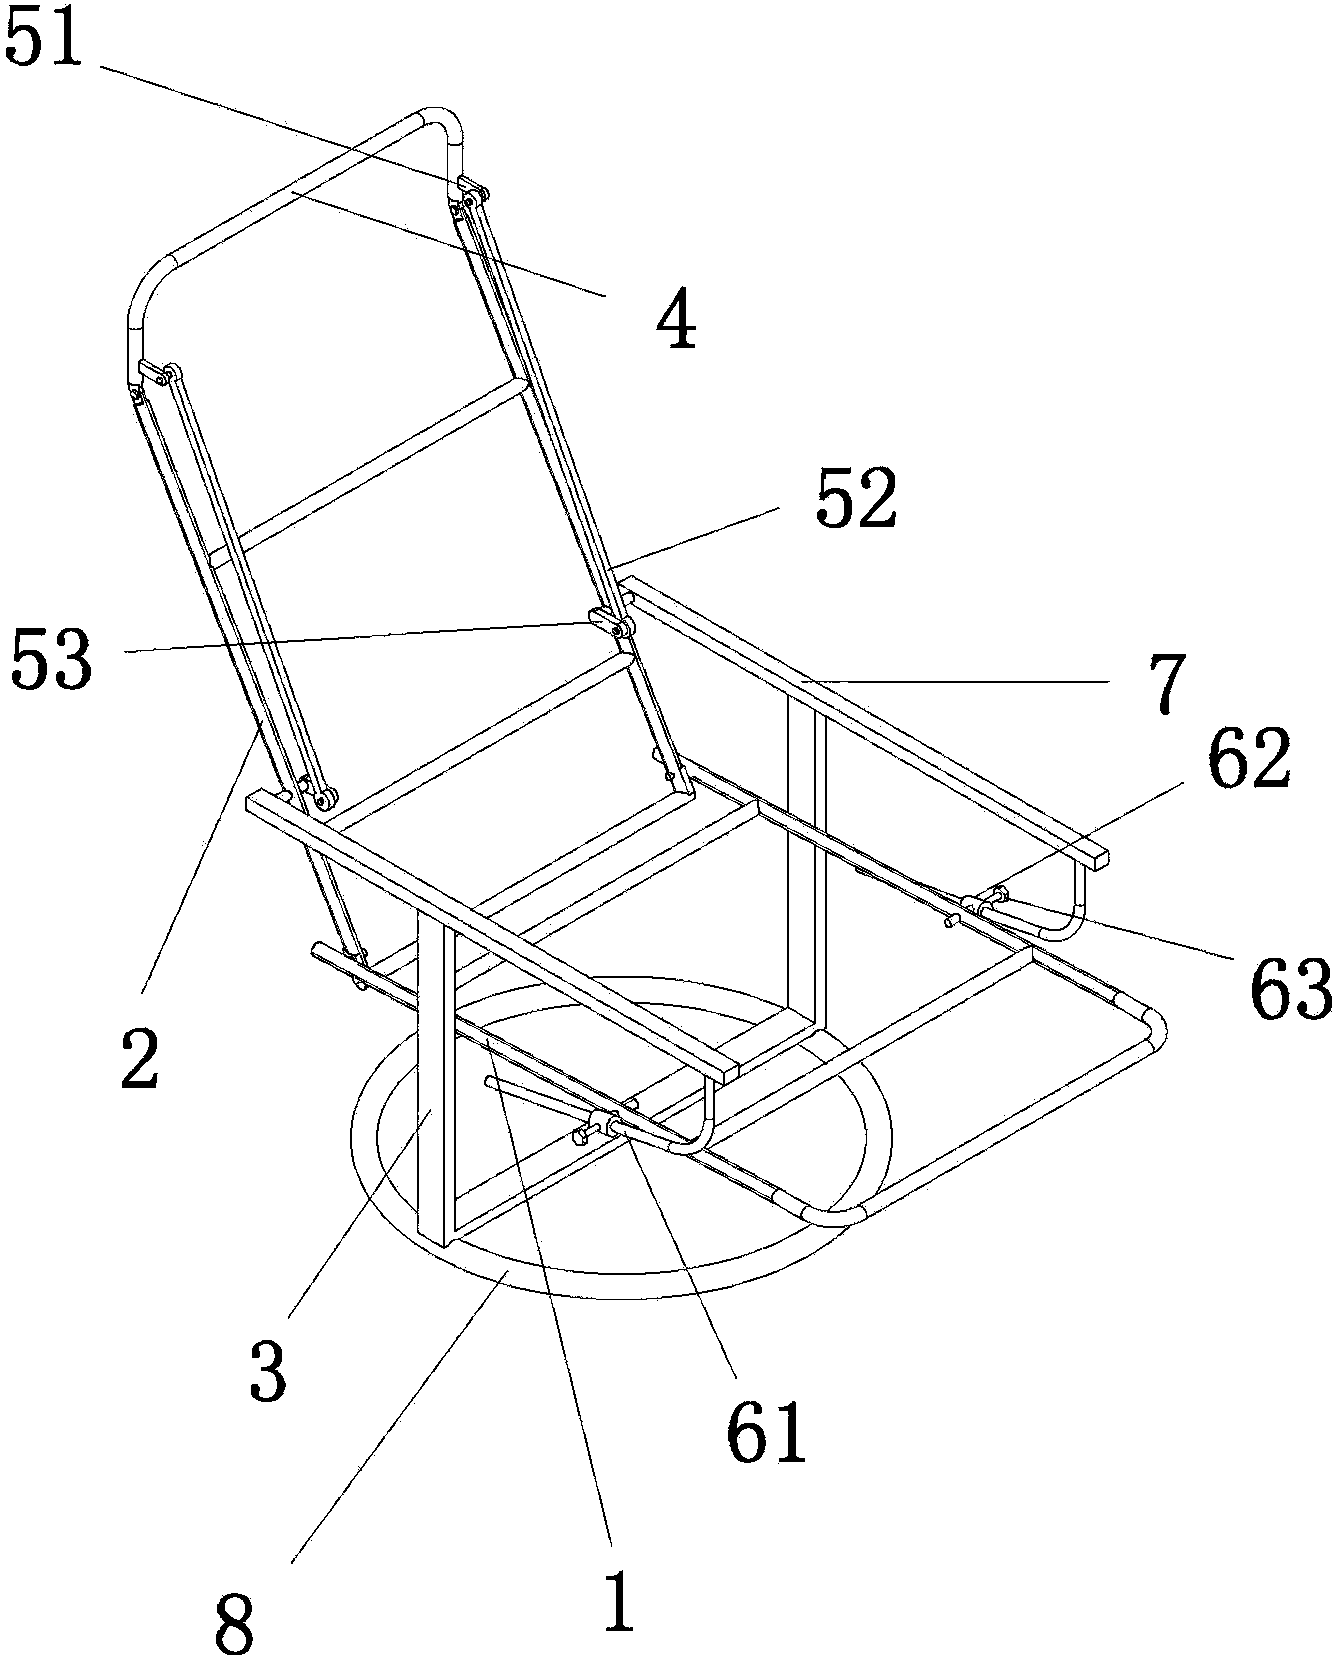 Chair frame with headrest and backrest capable of being synchronously adjusted